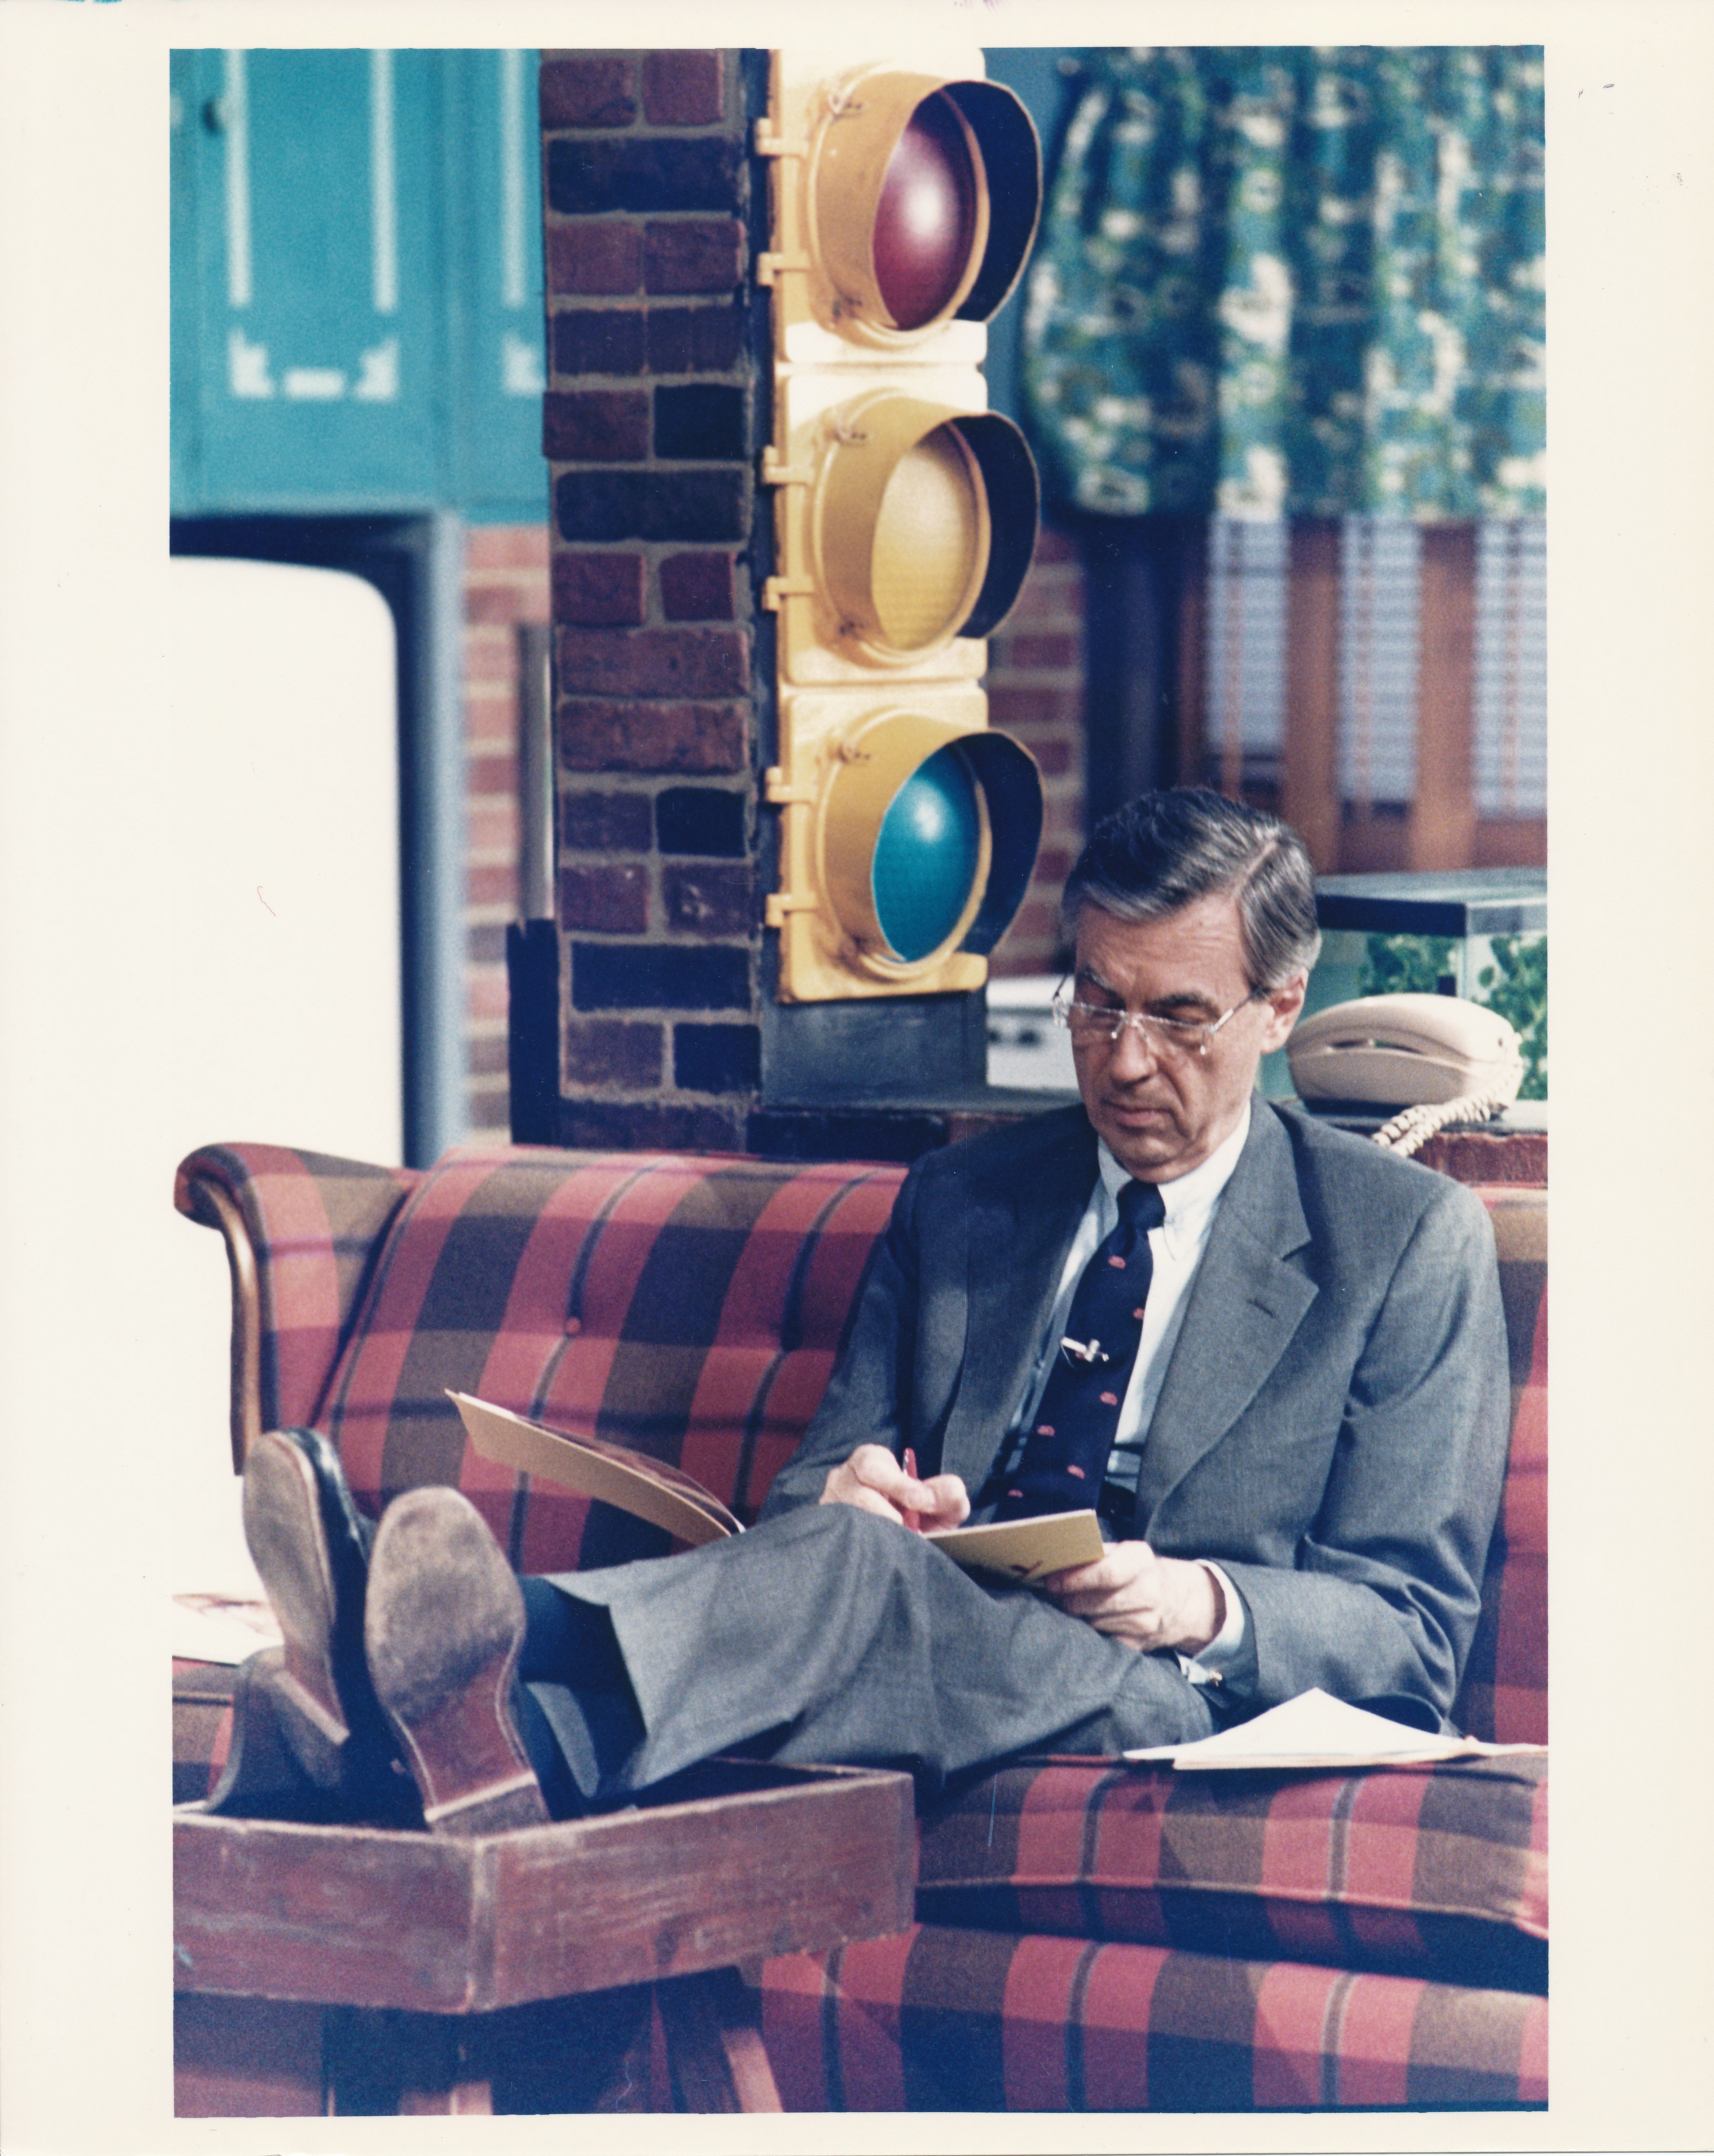 Mister Rogers working on the set. Fred rogers, Mister rogers neighborhood, Mr rogers